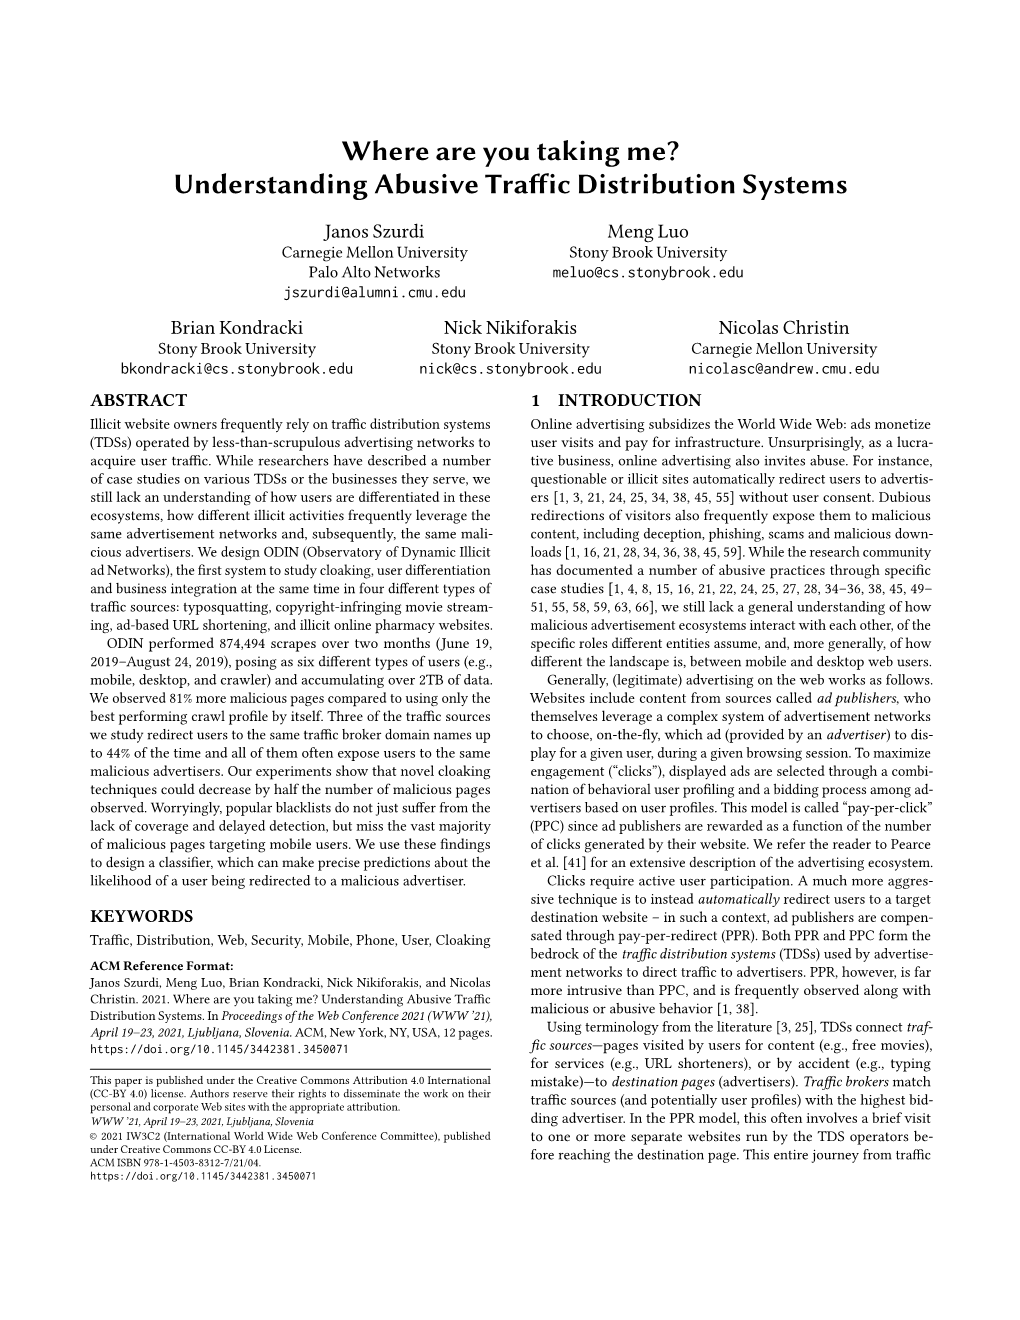 Understanding Abusive Traffic Distribution Systems